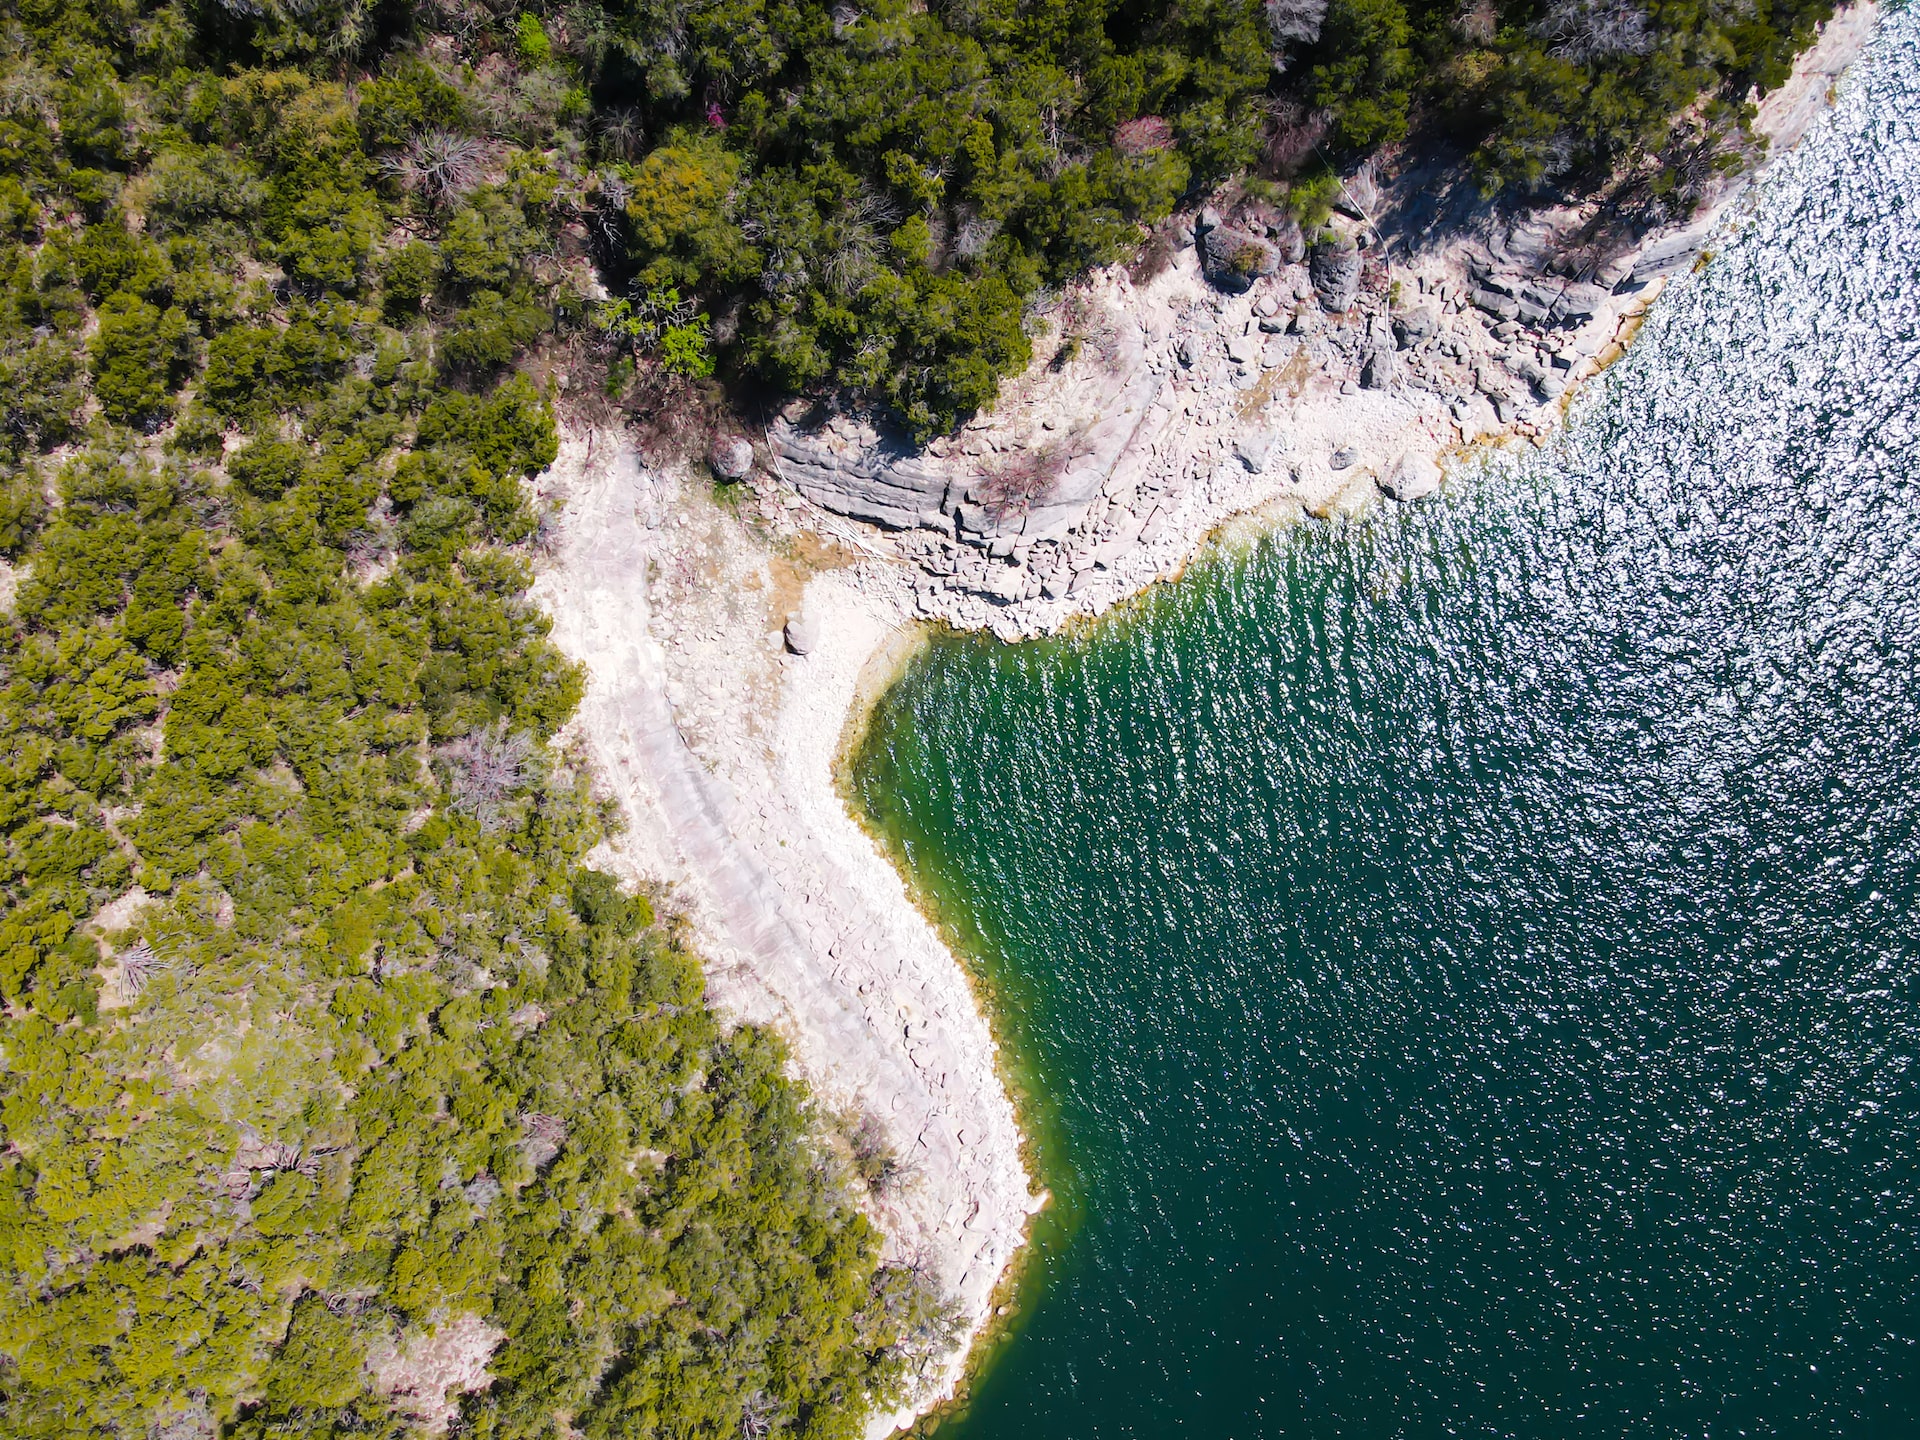 The shoreline along Lake Travis as seen from an aerial view.